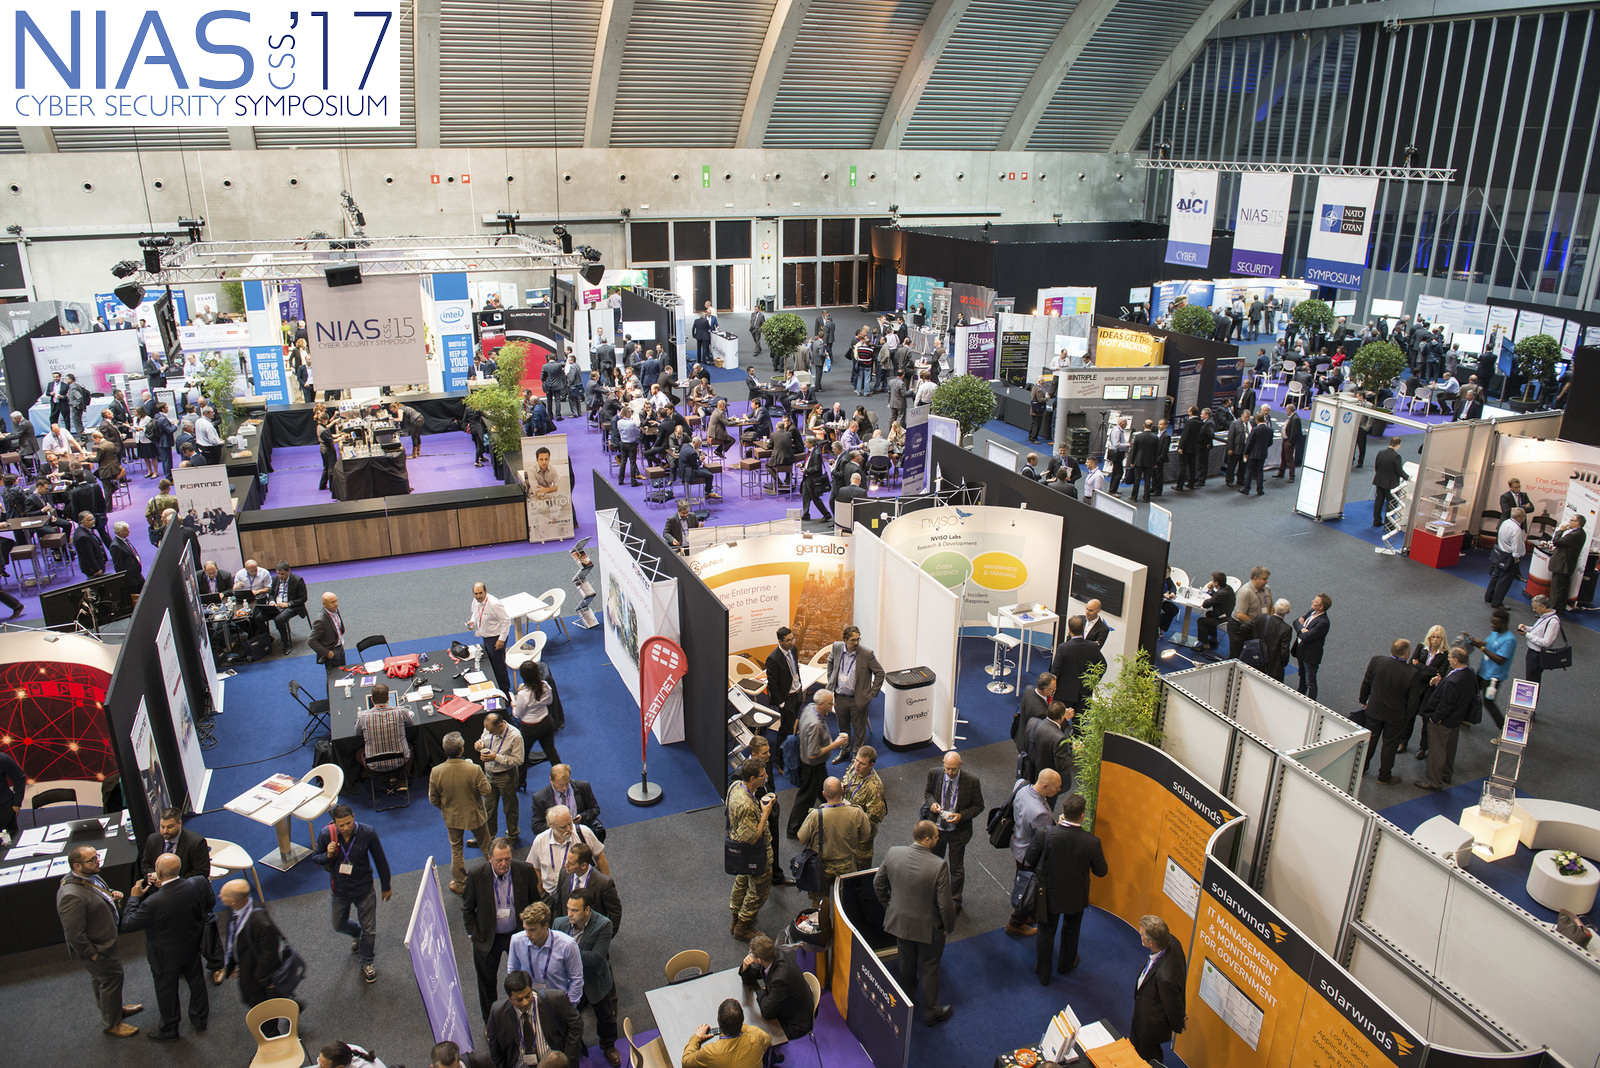 NIAS CSS conference floor - birdseye view of vendors and visitors